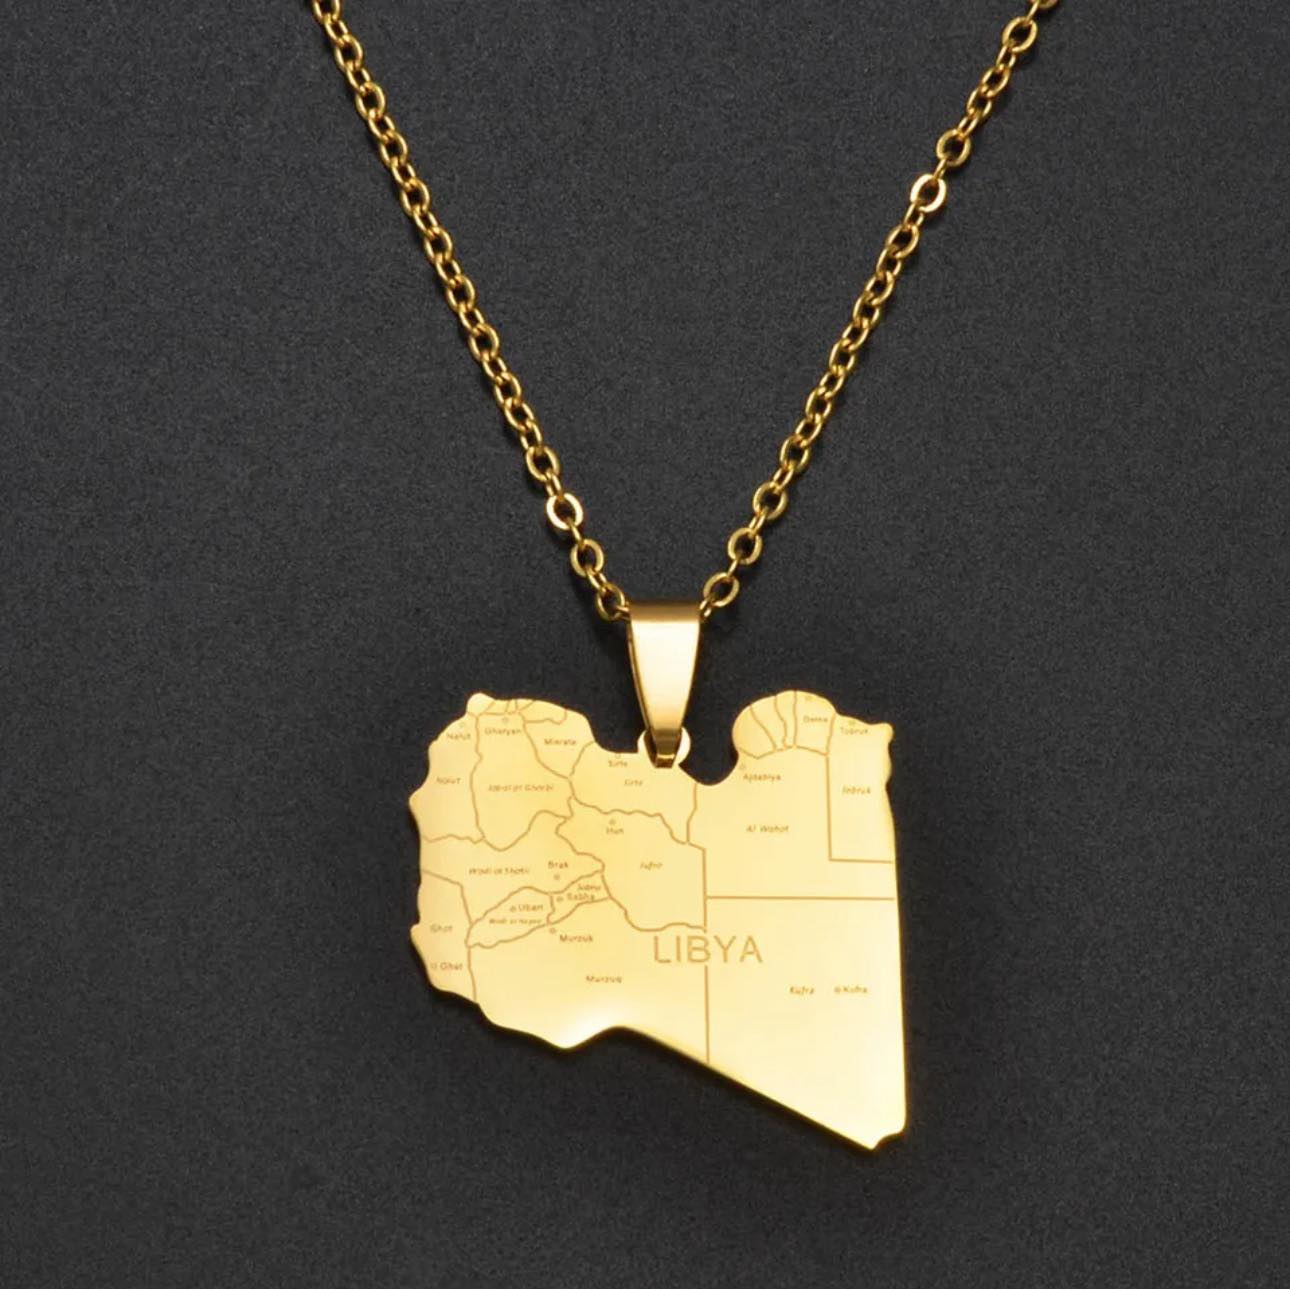 Libya Map & Cities Necklace